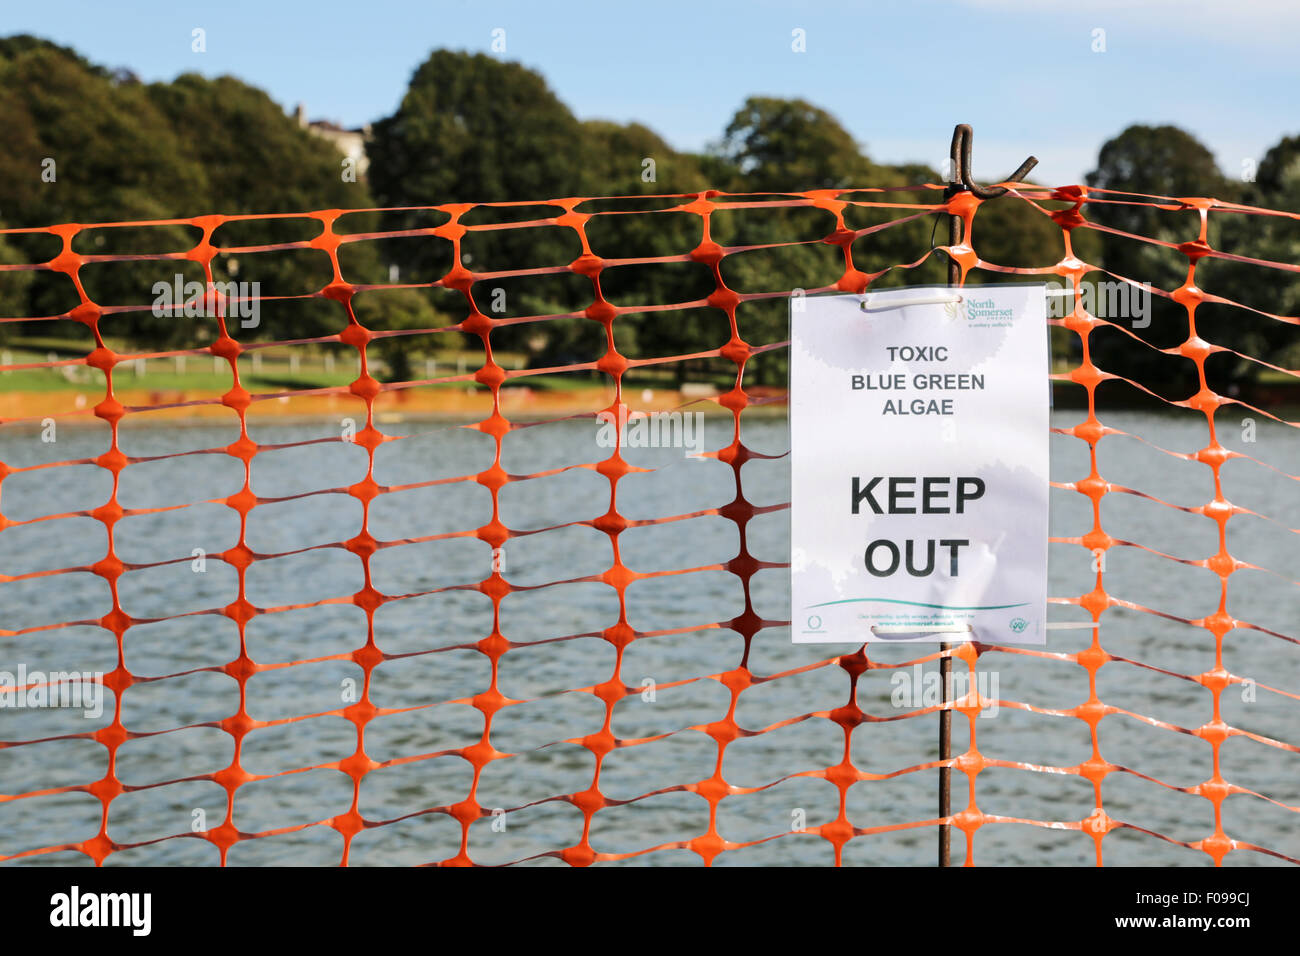 Portishead, North Somerset, UK, Monday 10th August 2015. A local marine lake, popular for boating on by locals and day trippers, is fenced off to the public, by the local council, after high concentrations of toxic blue-green algae are found in the water.  The toxin can prove fatal to pets drinking the water. A particular problem here as it's a popular area for dog walkers. The risk to humans from the toxin comes mainly from external exposure leading to skin rashes, lesions and blisters. Credit:  Stephen Hyde/Alamy Live News Stock Photo